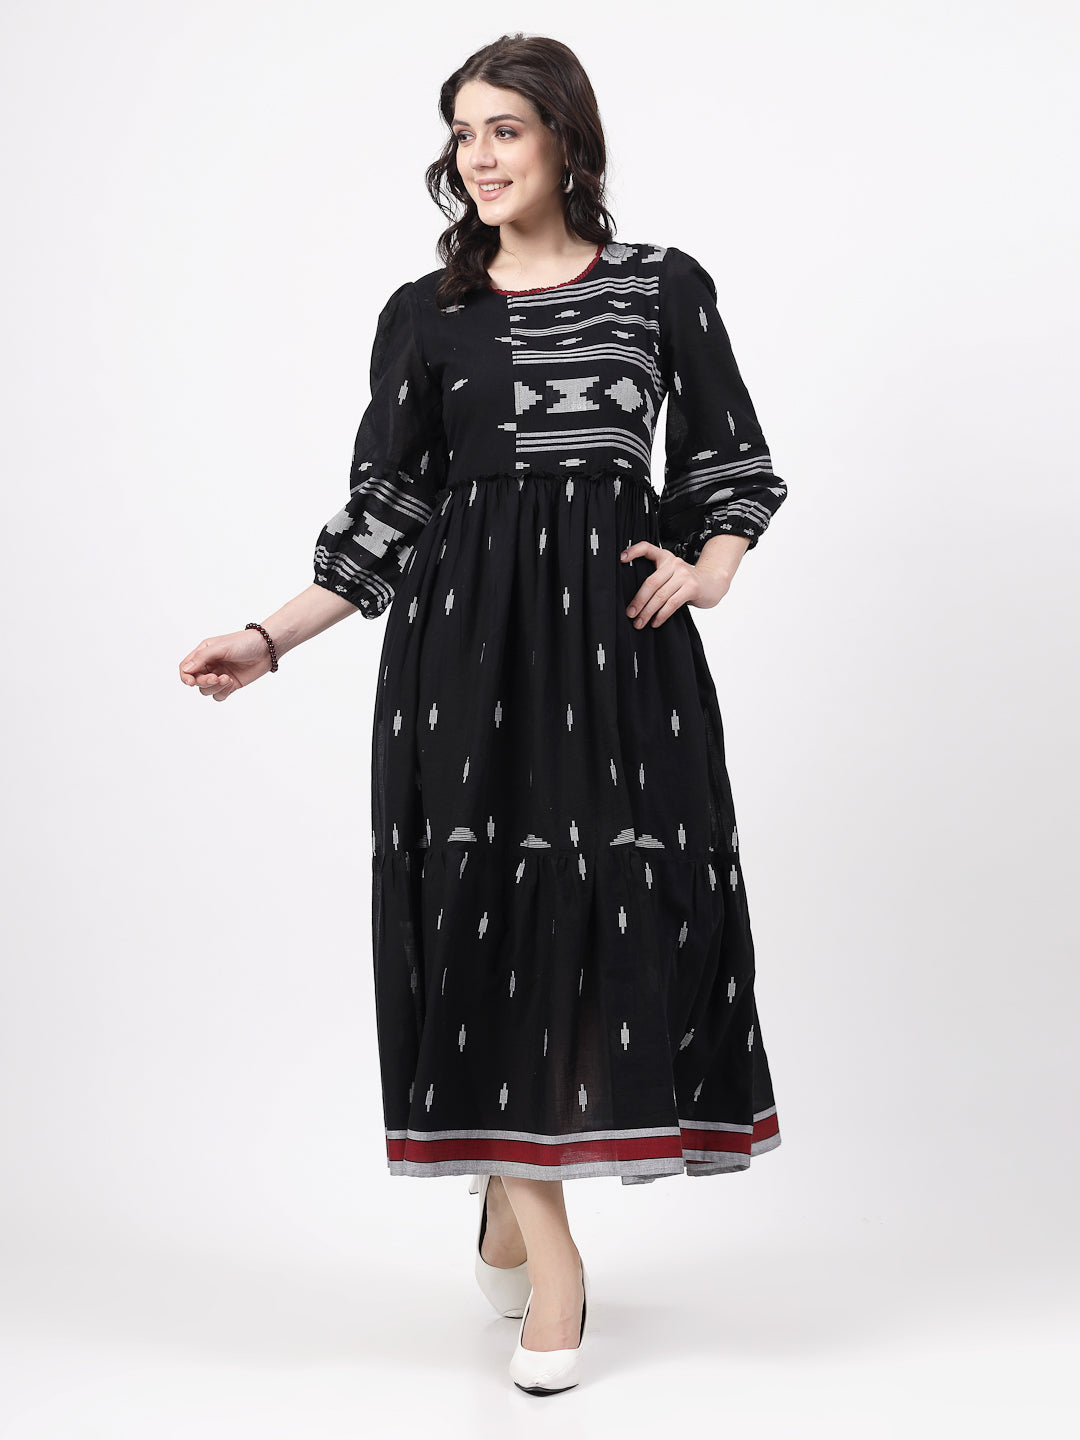 Terquois Black and White Yarn Dyed 100% Cotton Dress Dresses TERQUOIS   